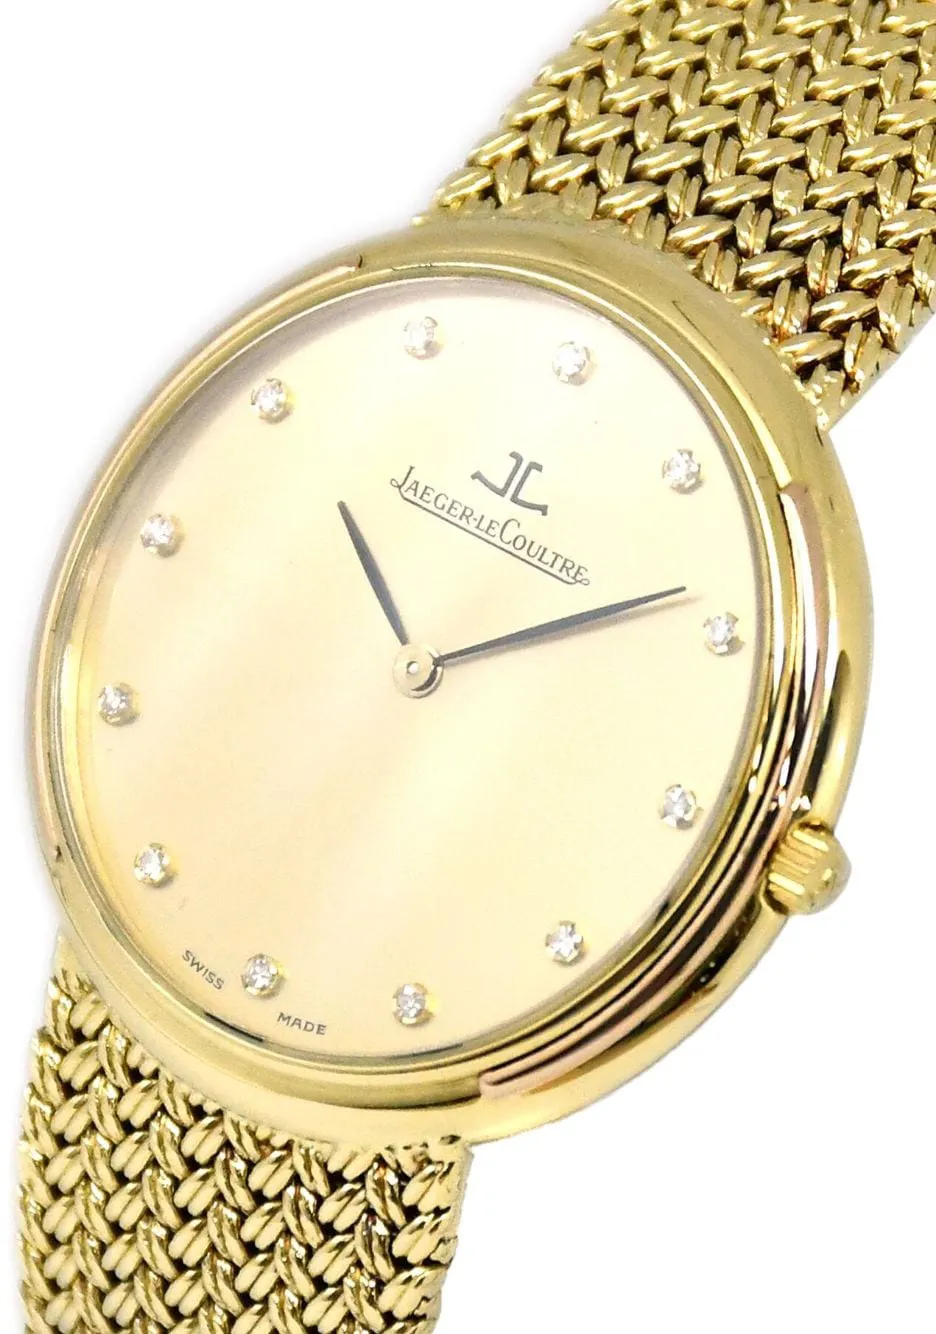 Jaeger-LeCoultre Odysseus 164.71.79 33mm Yellow gold Gold